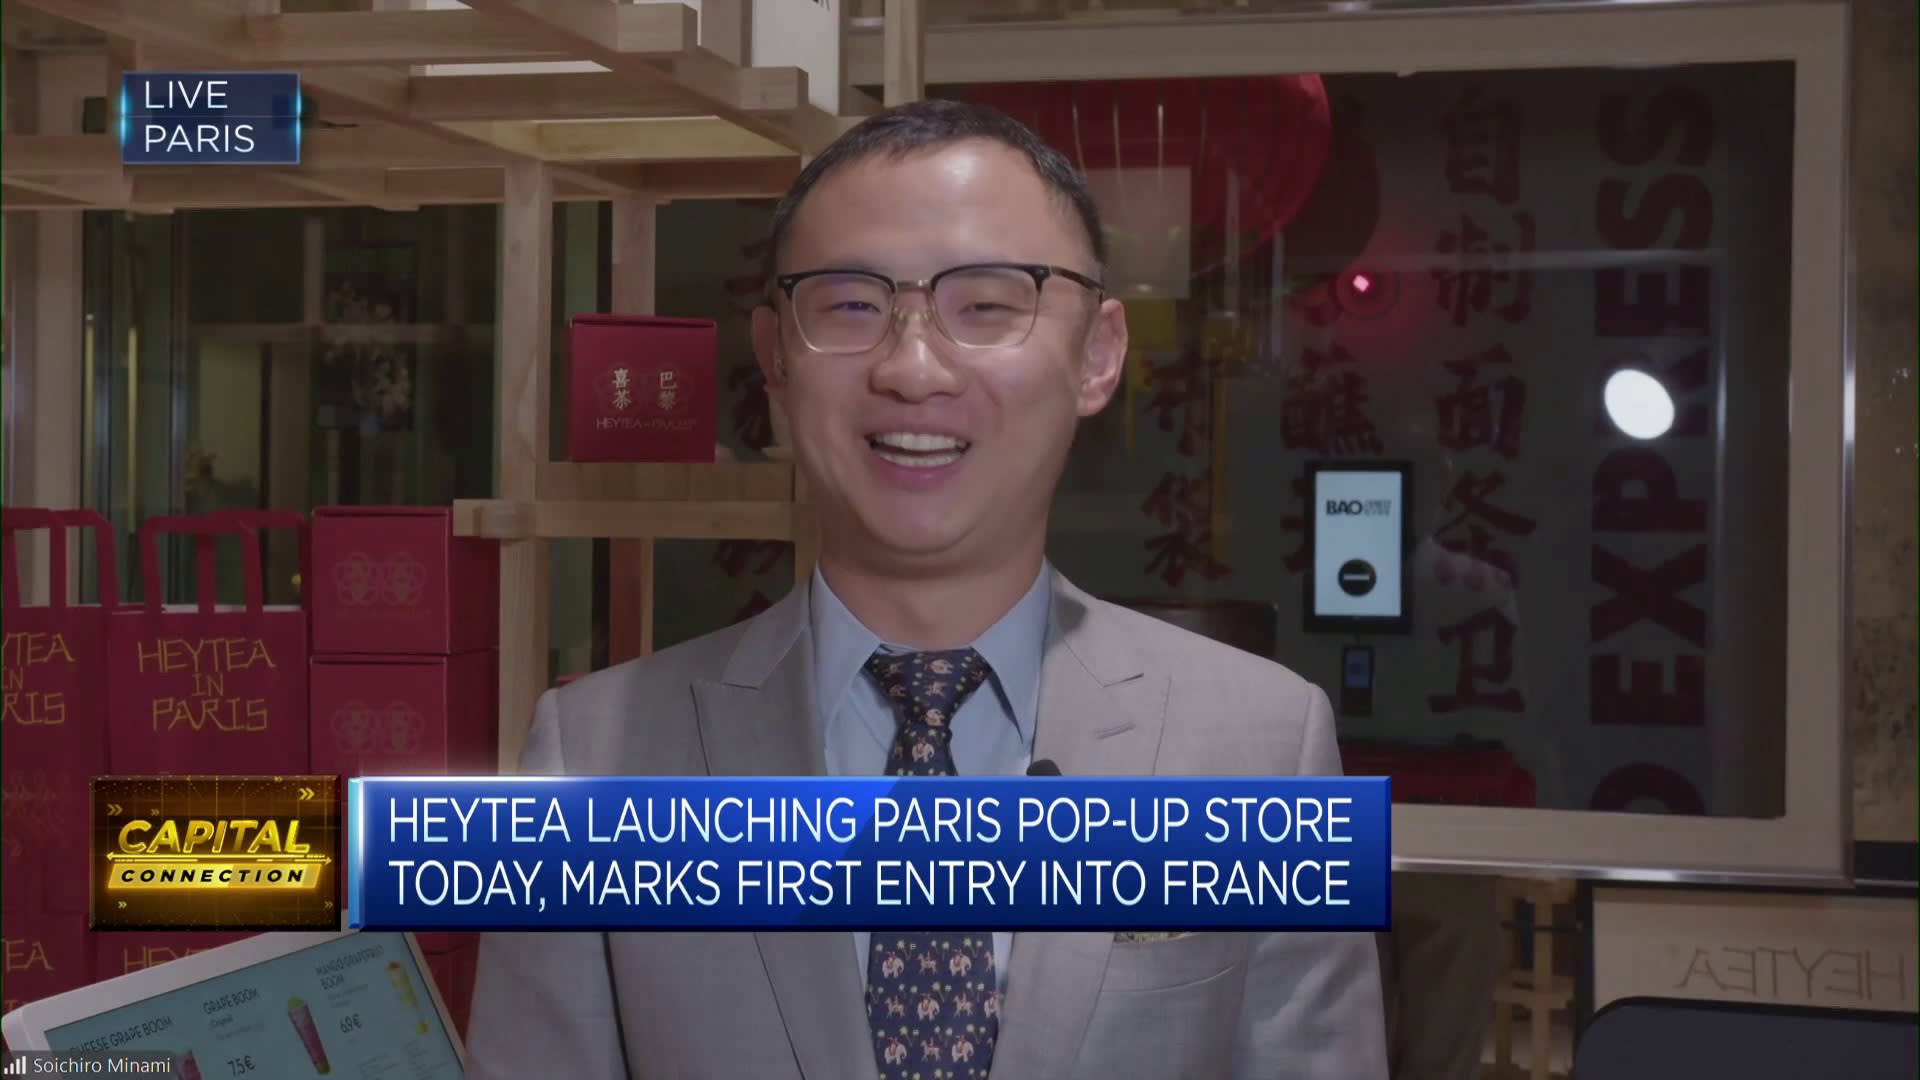 China’s Heytea explains why it opened a pop-up store in Paris [Video]